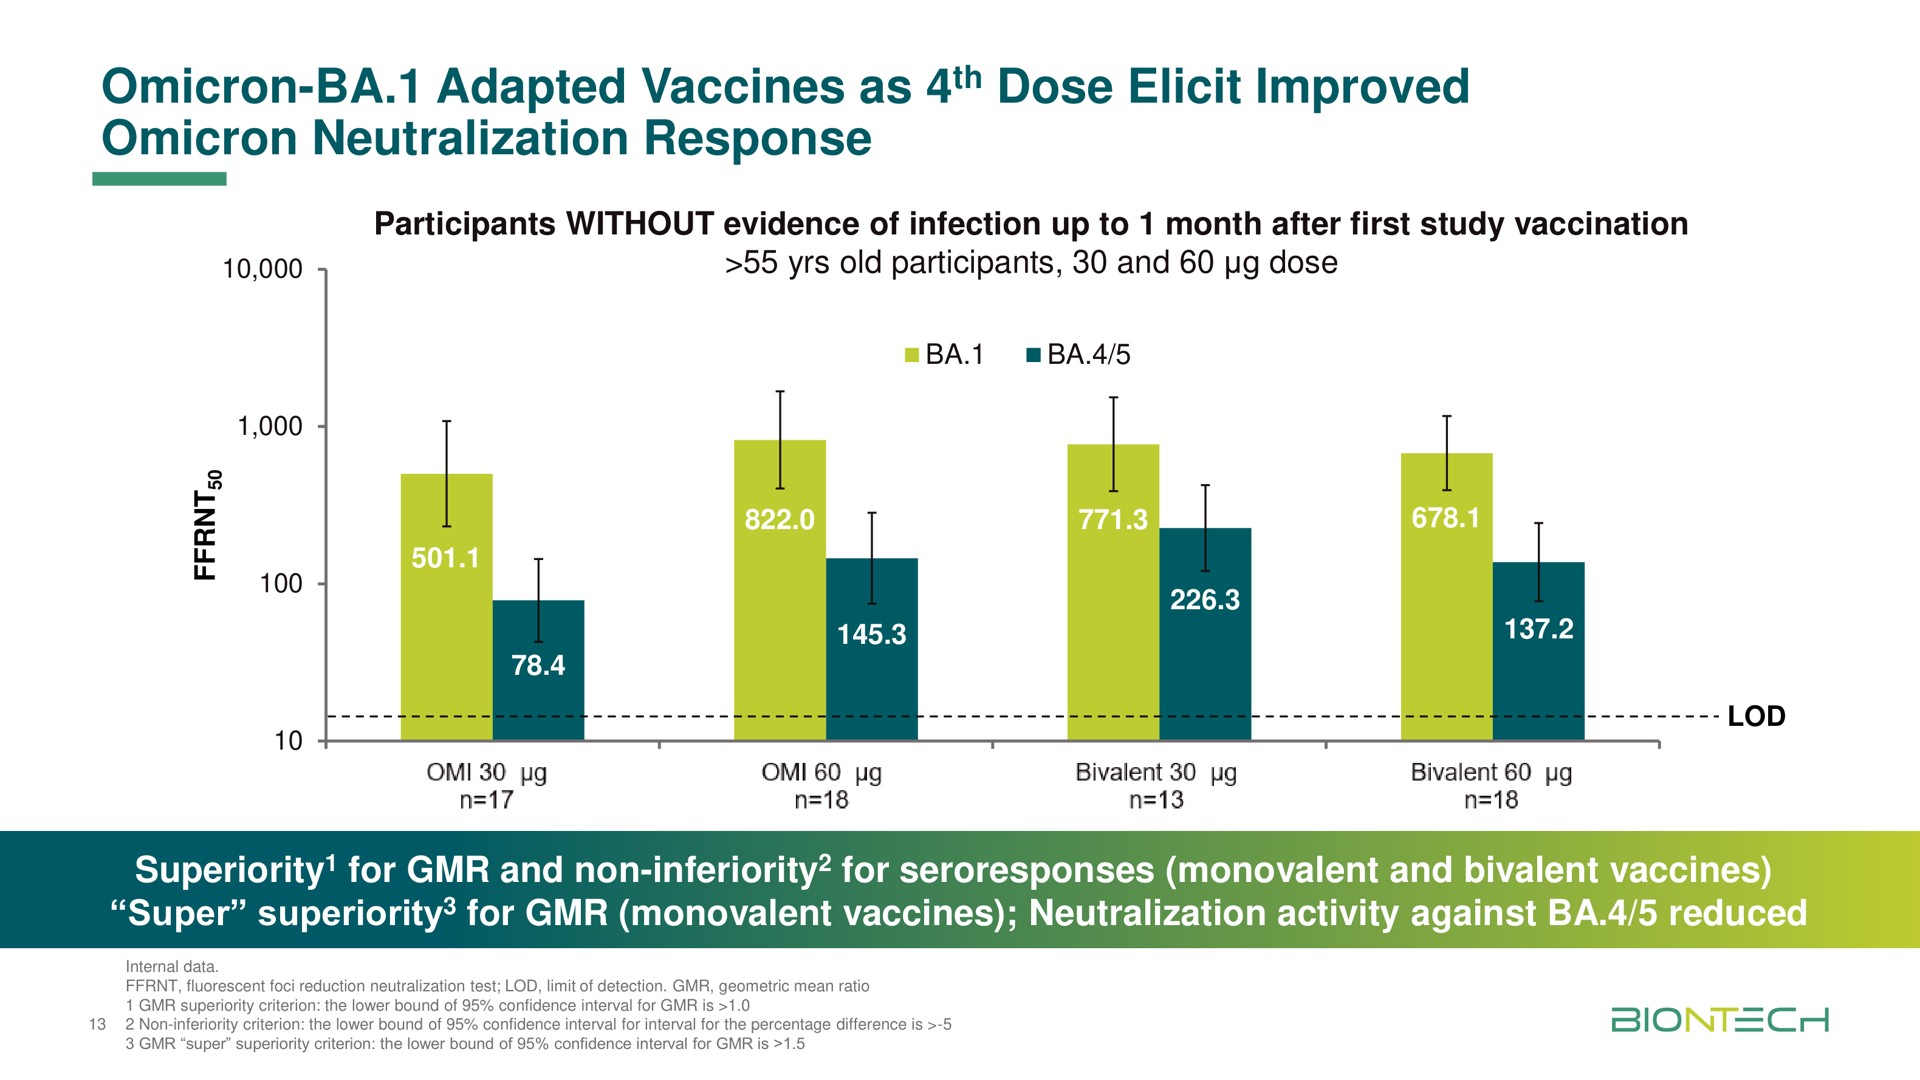 omicron adapted vaccines as dose elicit improved omicron neutralization response | BioNTech